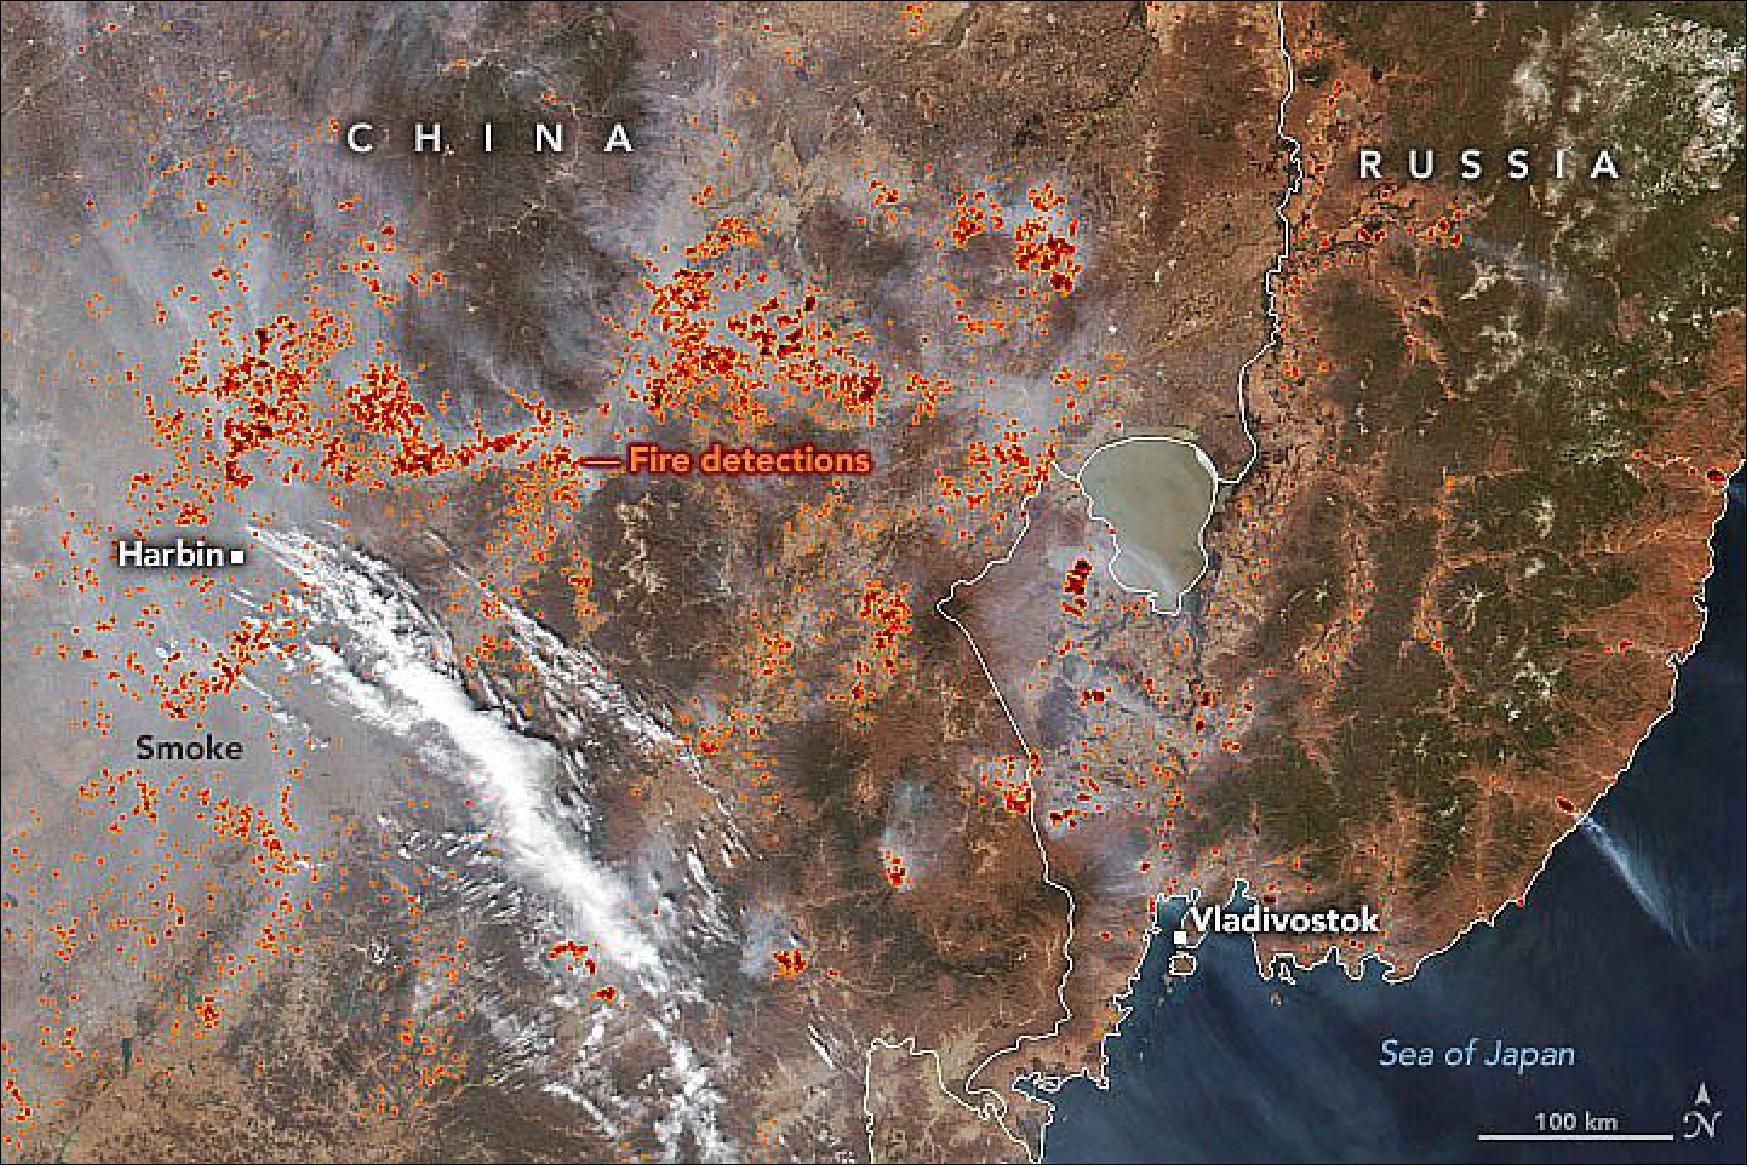 Figure 30: Many farmers in northeastern China and eastern Russia use fire to clear fields and get them ready for planting. This practice sometimes leads to hazy, smoke-filled skies, as shown by this natural-color satellite image from the Visible Infrared Imaging Radiometer Suite (VIIRS) on the NOAA-NASA Suomi NPP satellite. Throughout the spring, VIIRS has detected large numbers of “hotspots” associated with fires. These hotspots appear red and orange in this image (image credit: NASA Earth Observatory image by Joshua Stevens, using VIIRS data from NASA EOSDIS LANCE, GIBS/Worldview, and the Joint Polar Satellite System (JPSS). Story by Adam Voiland)